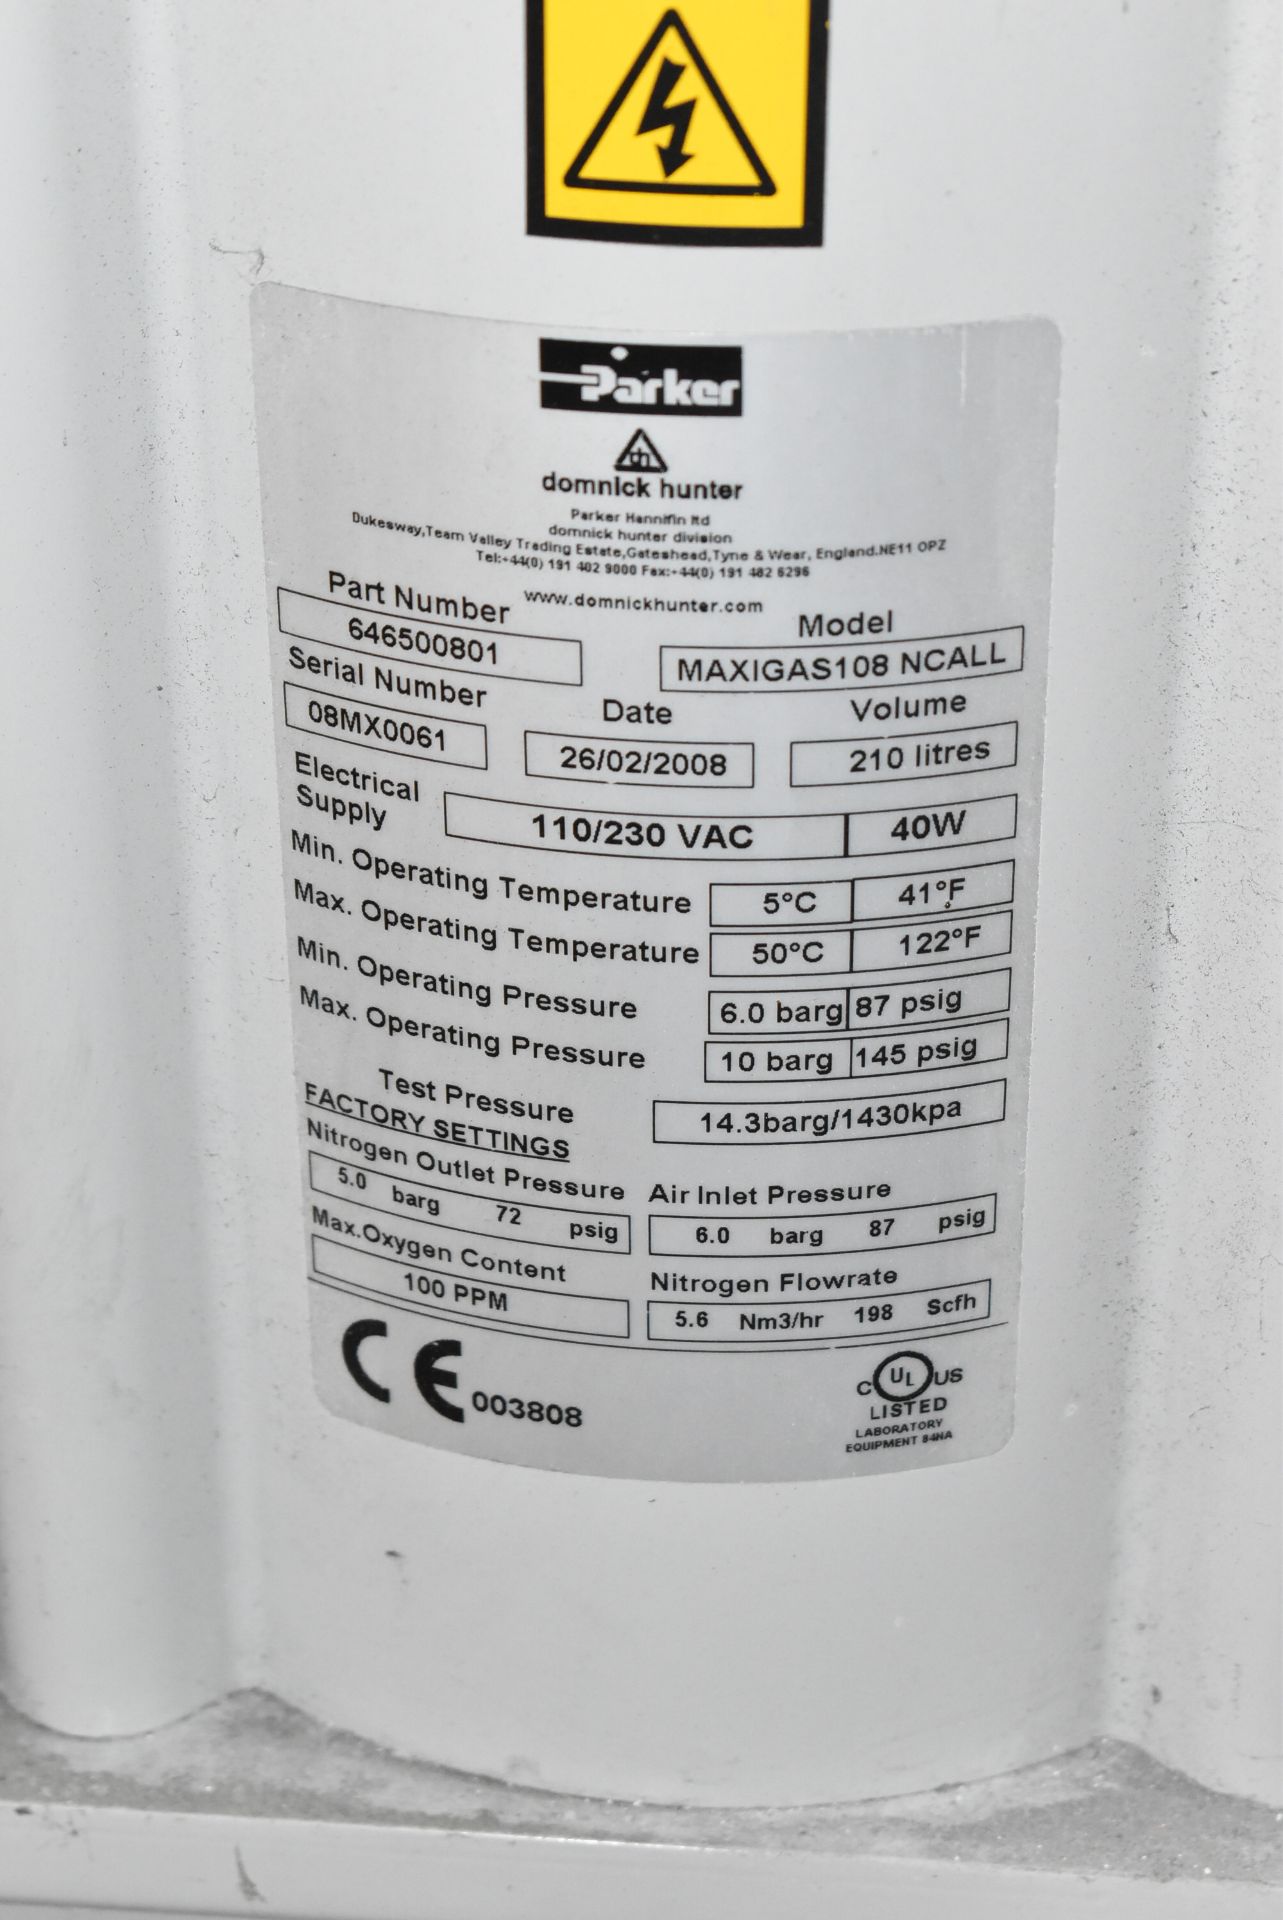 DOMNICK HUNTER MAXIGAS 108NCALL NITROGEN GENERATOR WITH 210 LITER MAX VOLUME, S/N 08MX0061 - Image 5 of 5